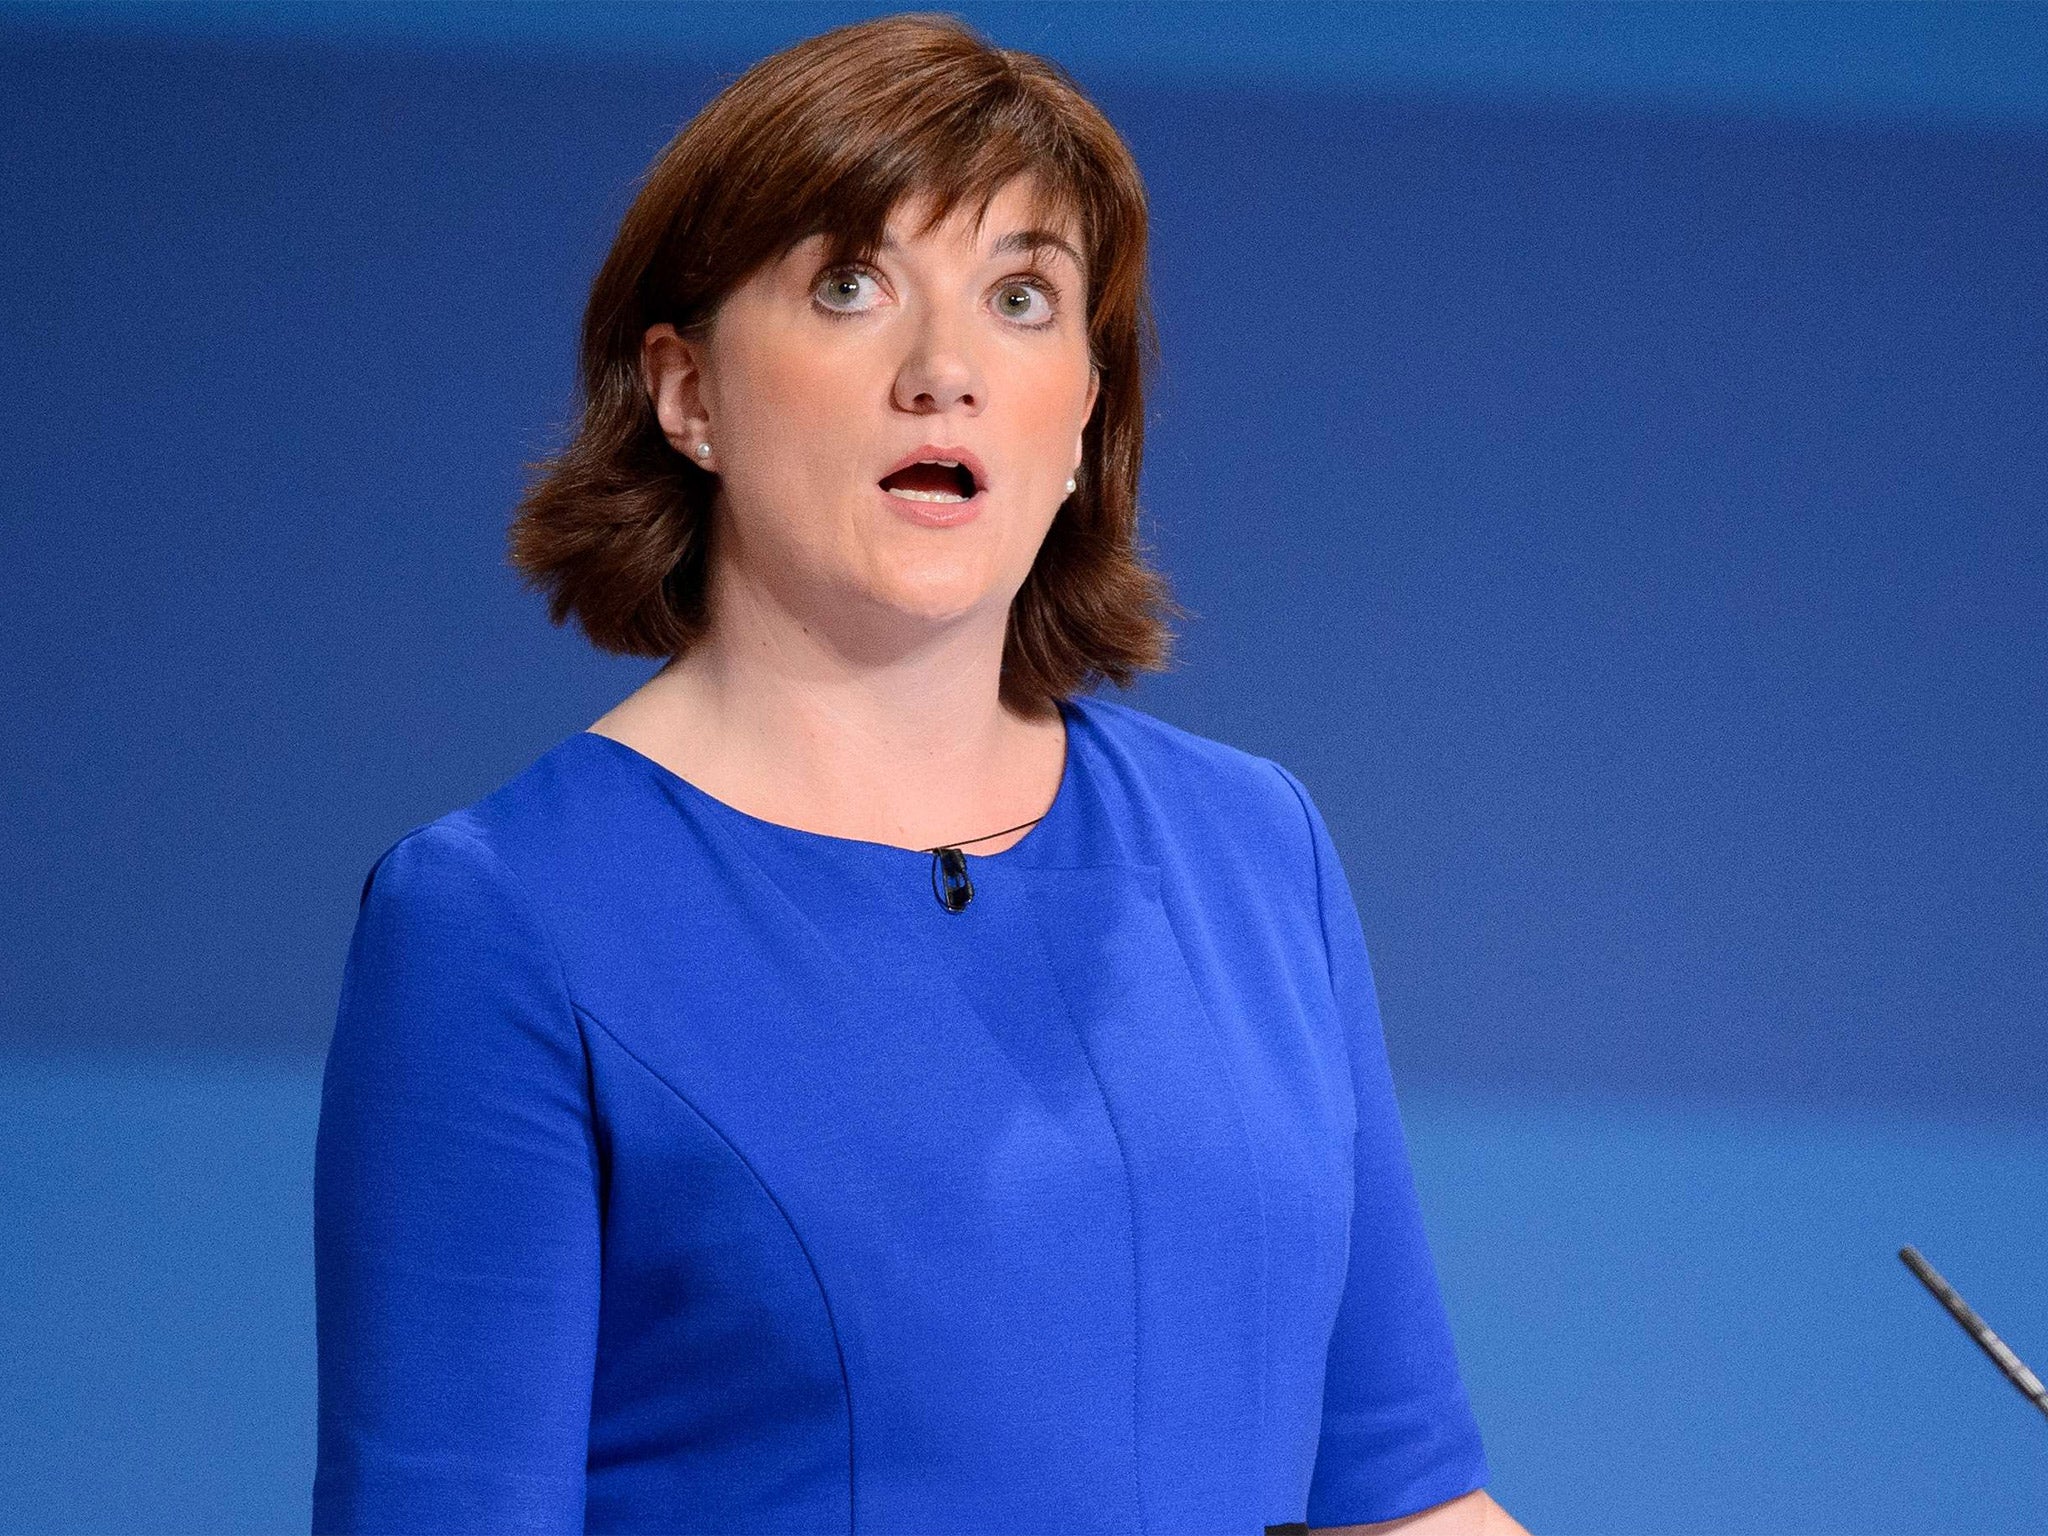 Nicky Morgan said she was ‘delighted’ by the narrowing of the gender pay gap revealed by ONS